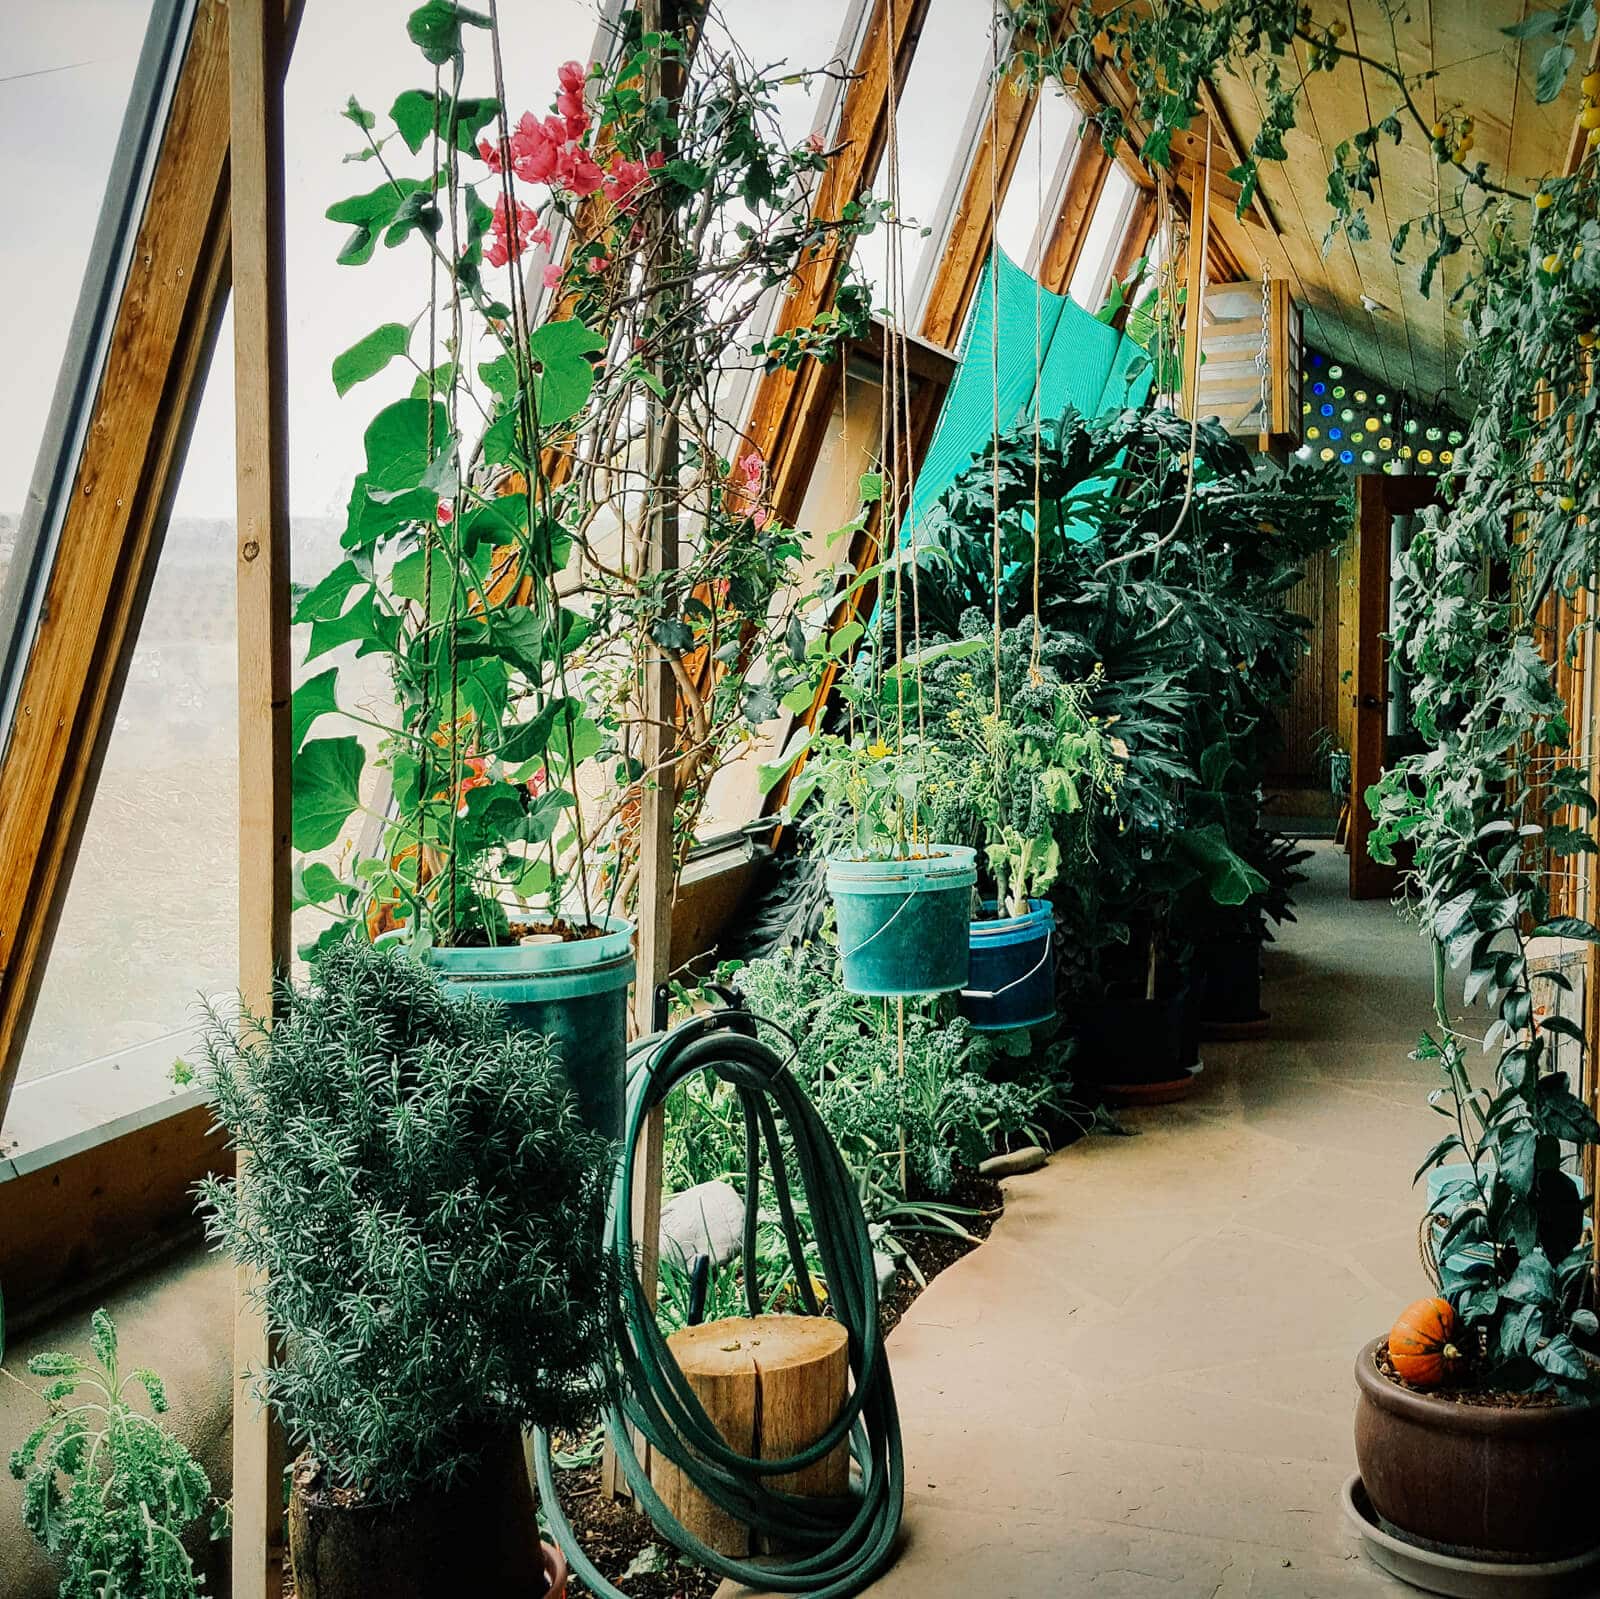 A working greenhouse garden in the Earthship Biotecture visitors' center